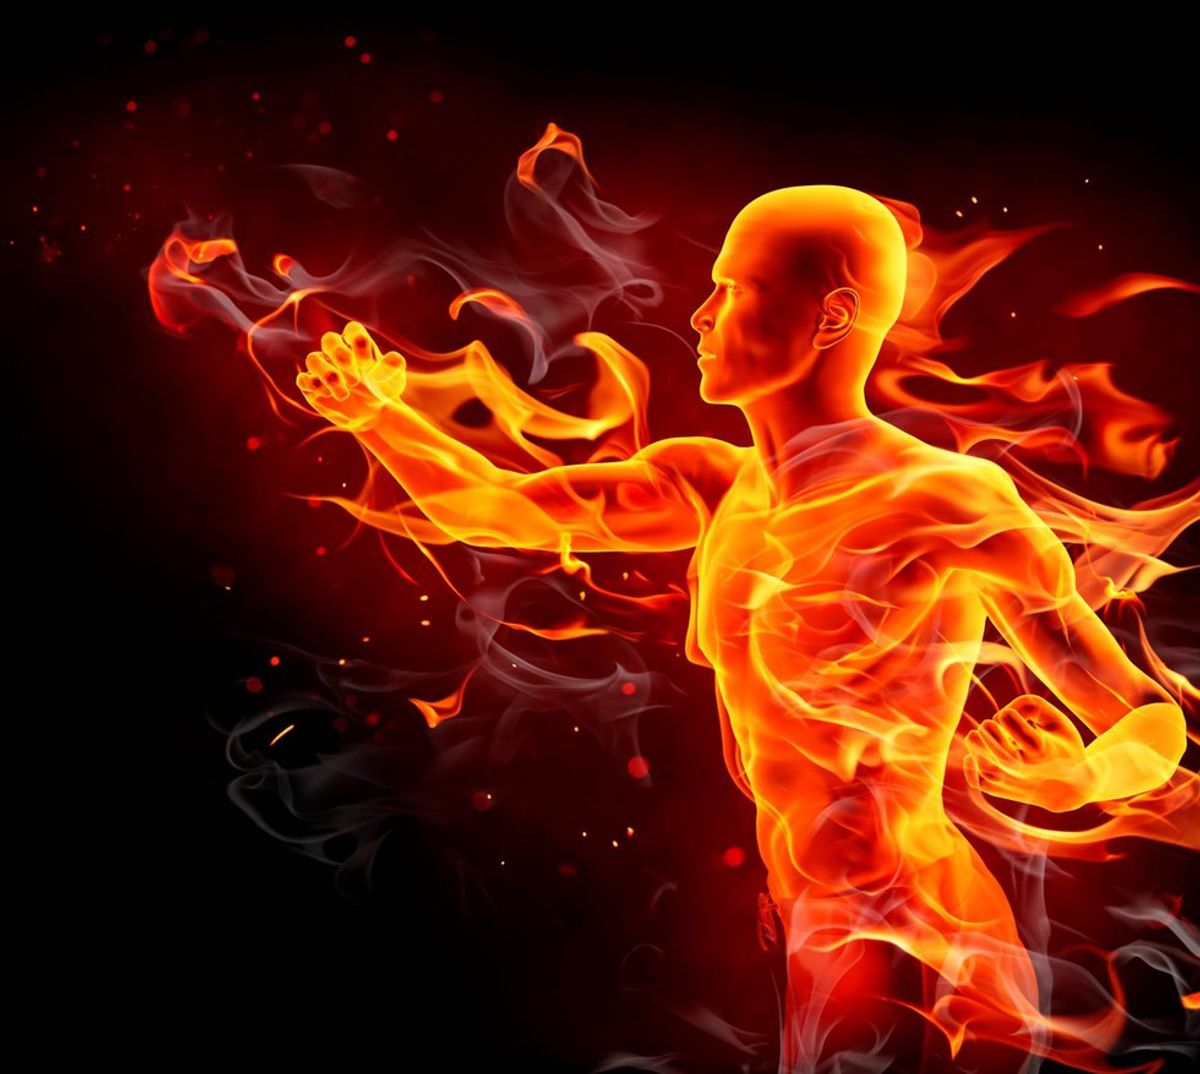 The Most Painful Disease That'll Have you on Fire